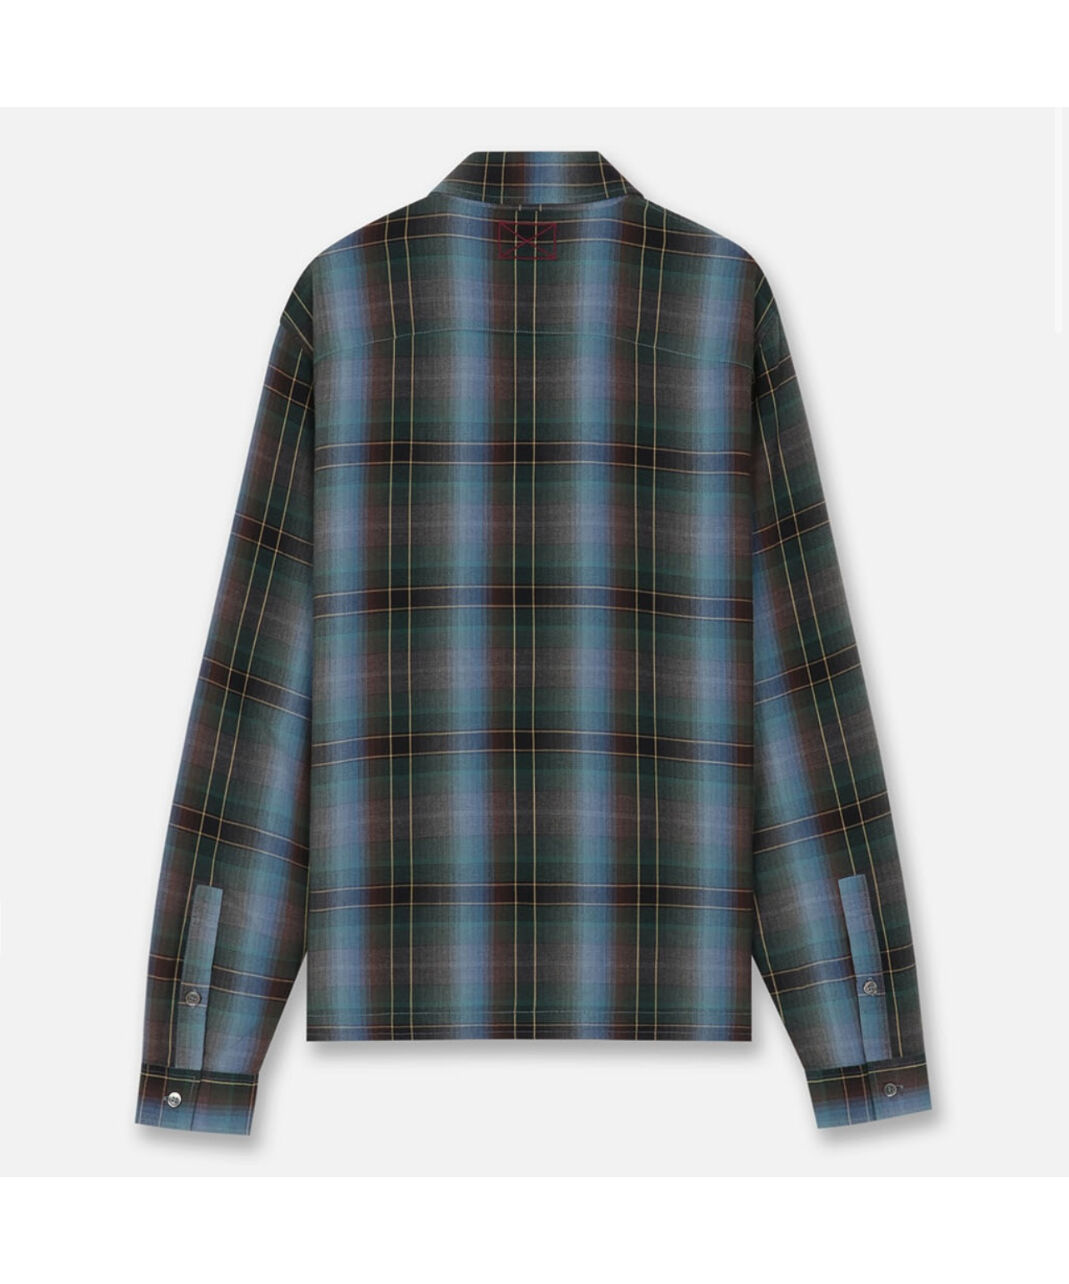 MLVINCE / rayon ombre check shirt blue | othell...